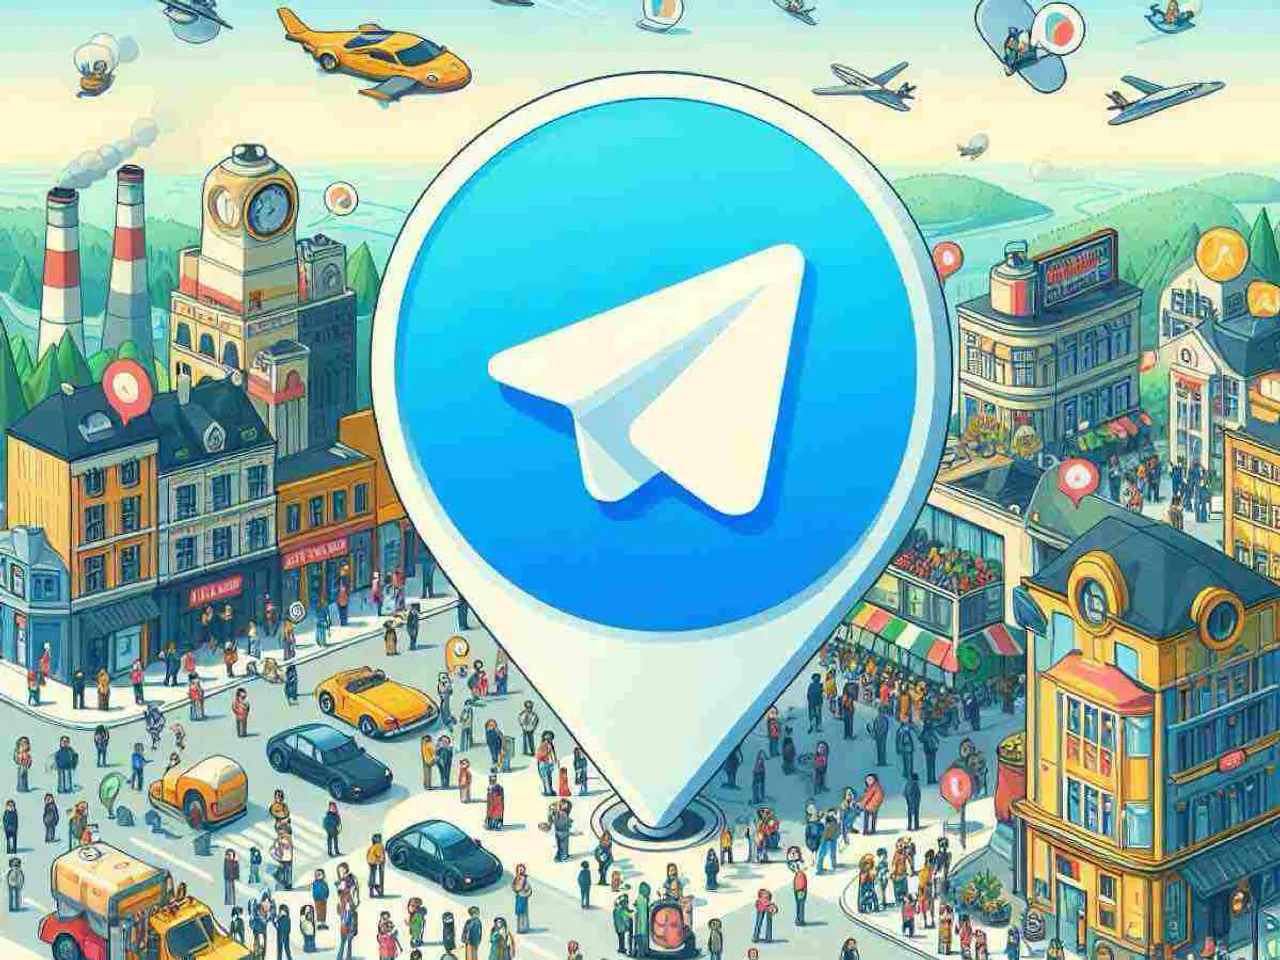 Pavel Durov’s Telegram Approaches One Billion Users, Blazing a Trail in the Realm of Social Media